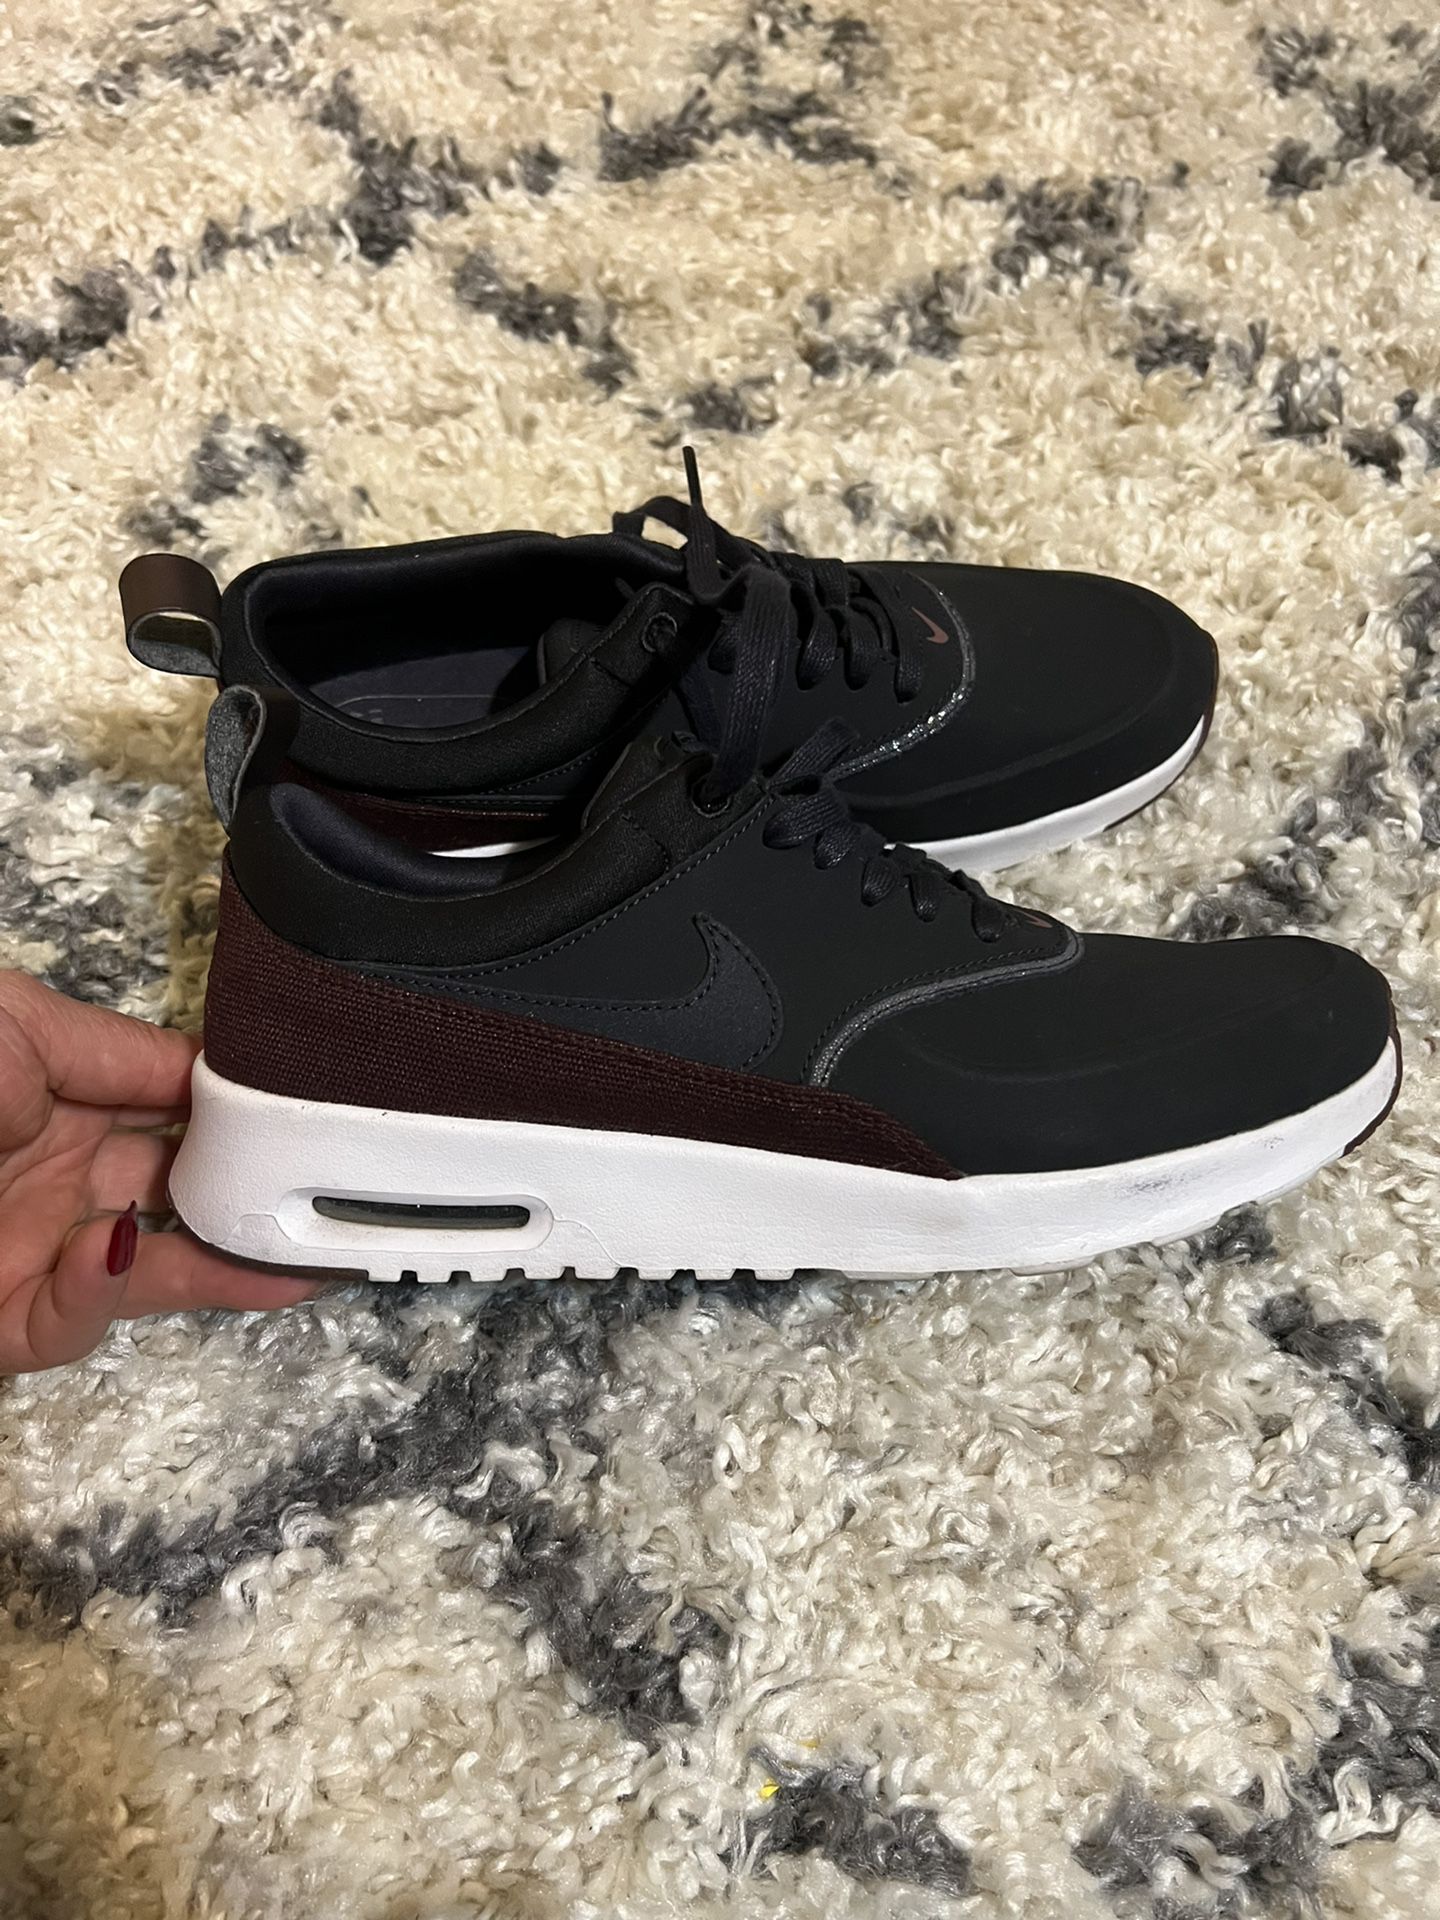 Nike Air Max Thea Women's Shoe 8 Like New for in Beltsville, MD - OfferUp